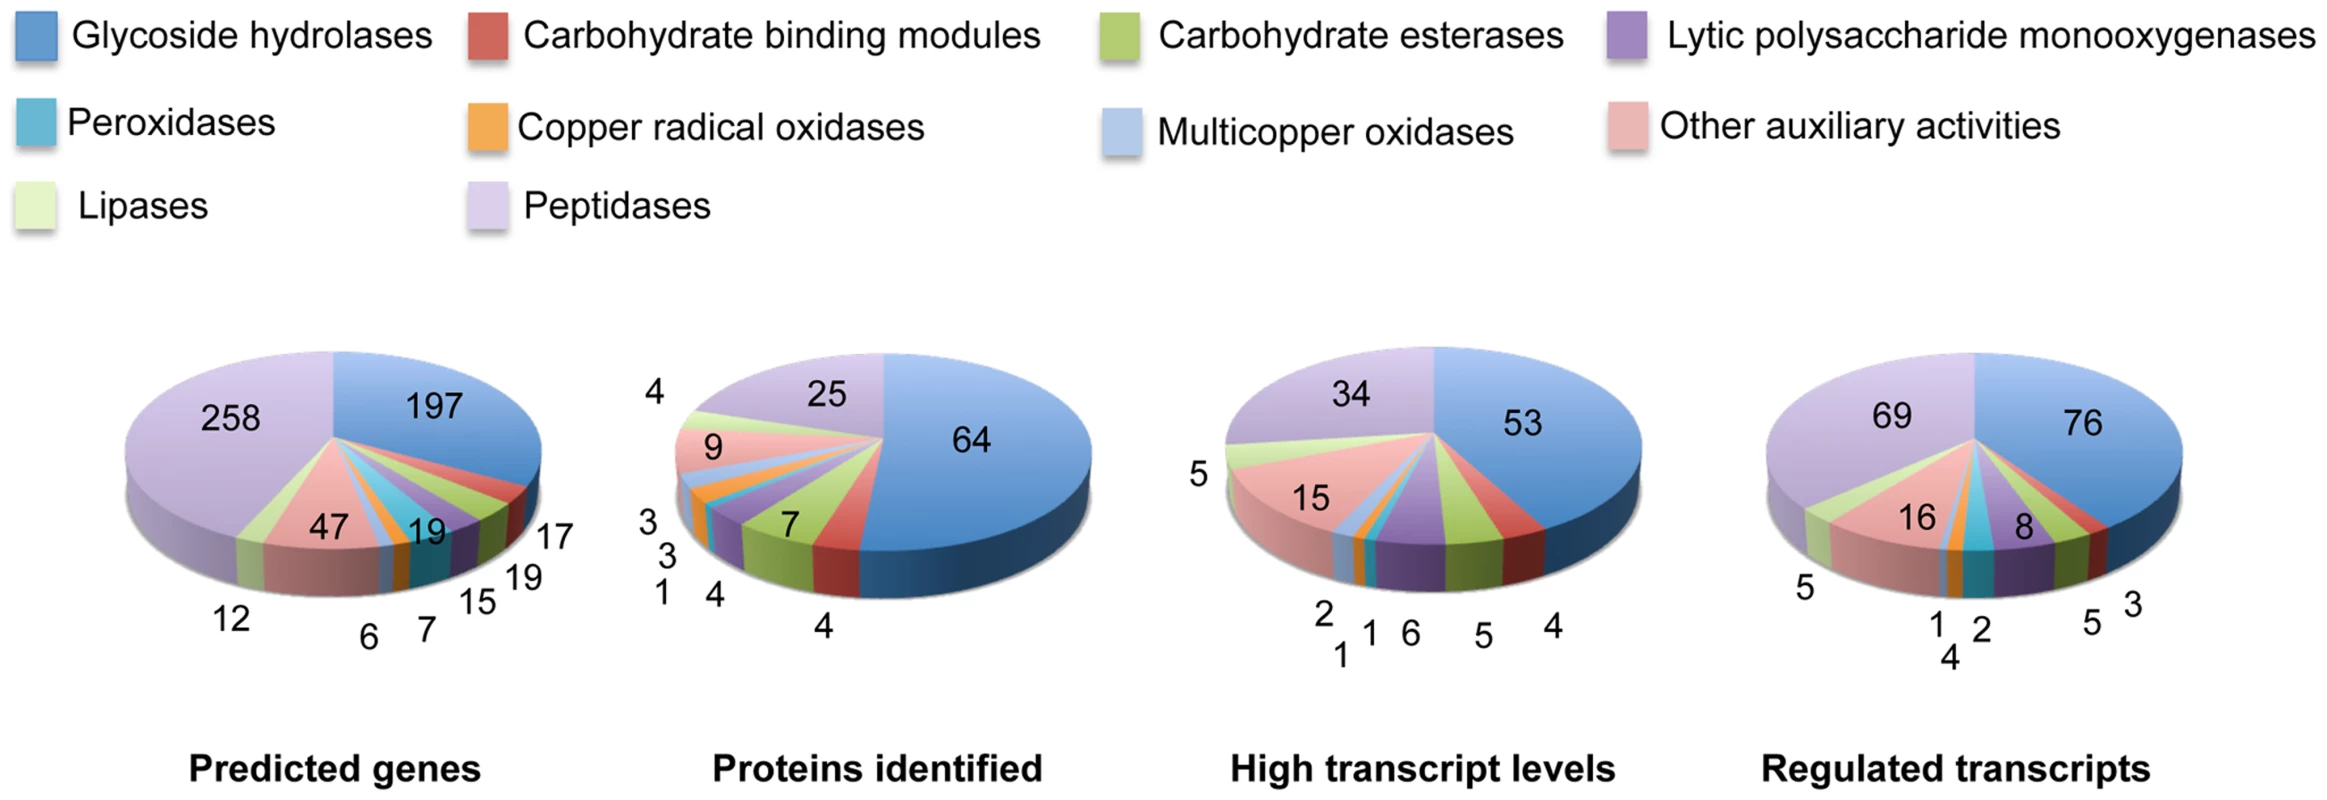 Number and expression of genes likely involved in lignocellulose degradation.